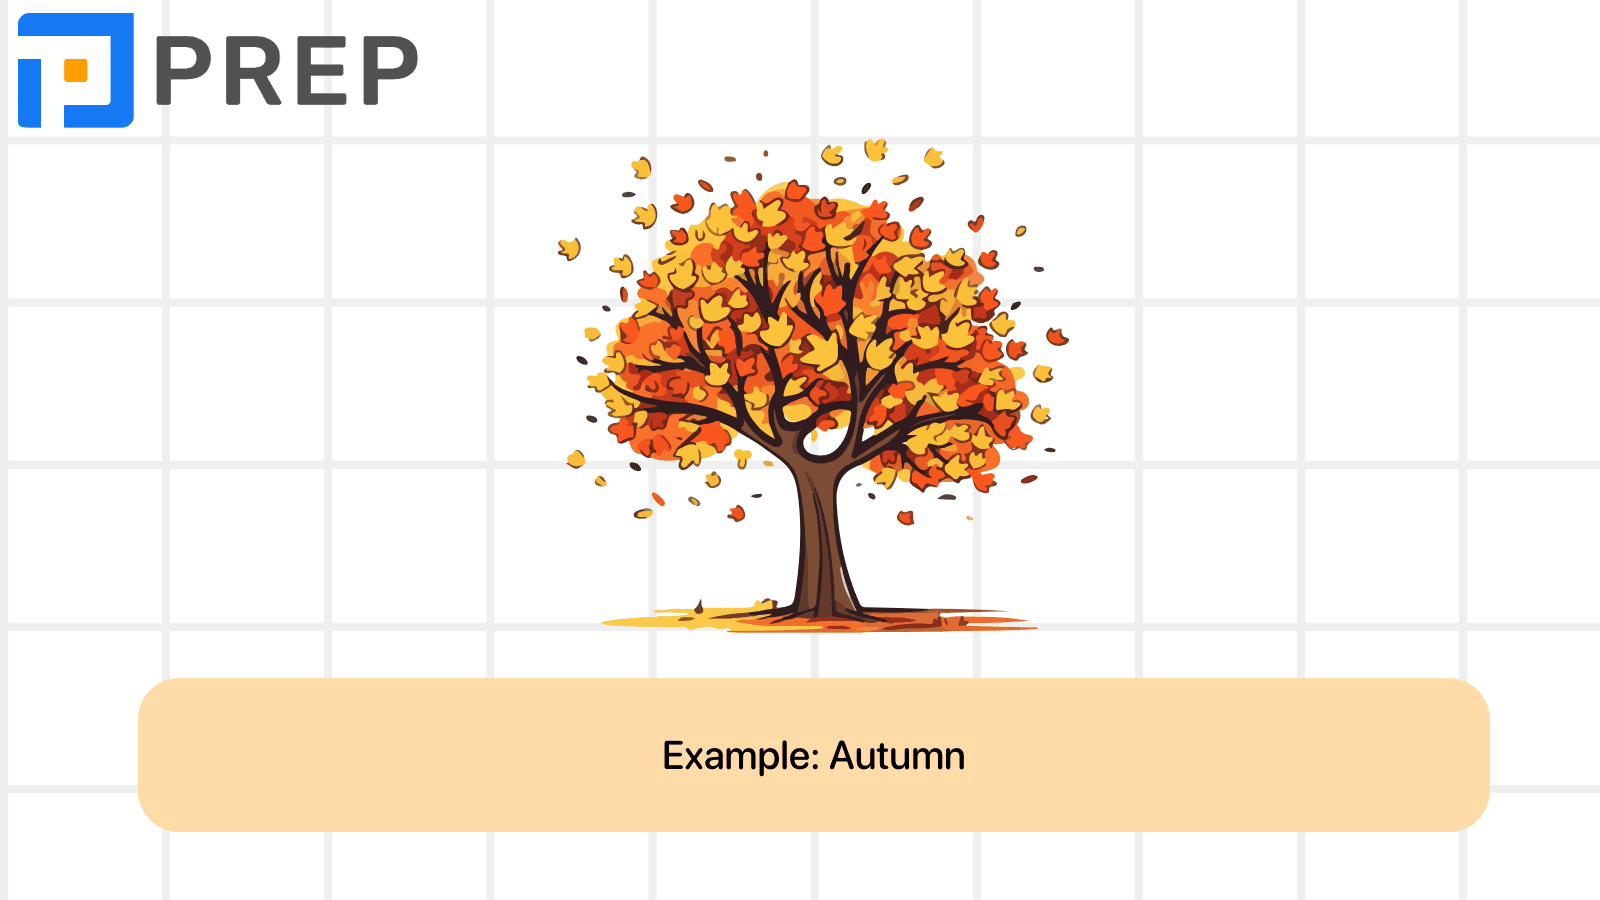 A2 level words: Time and seasons